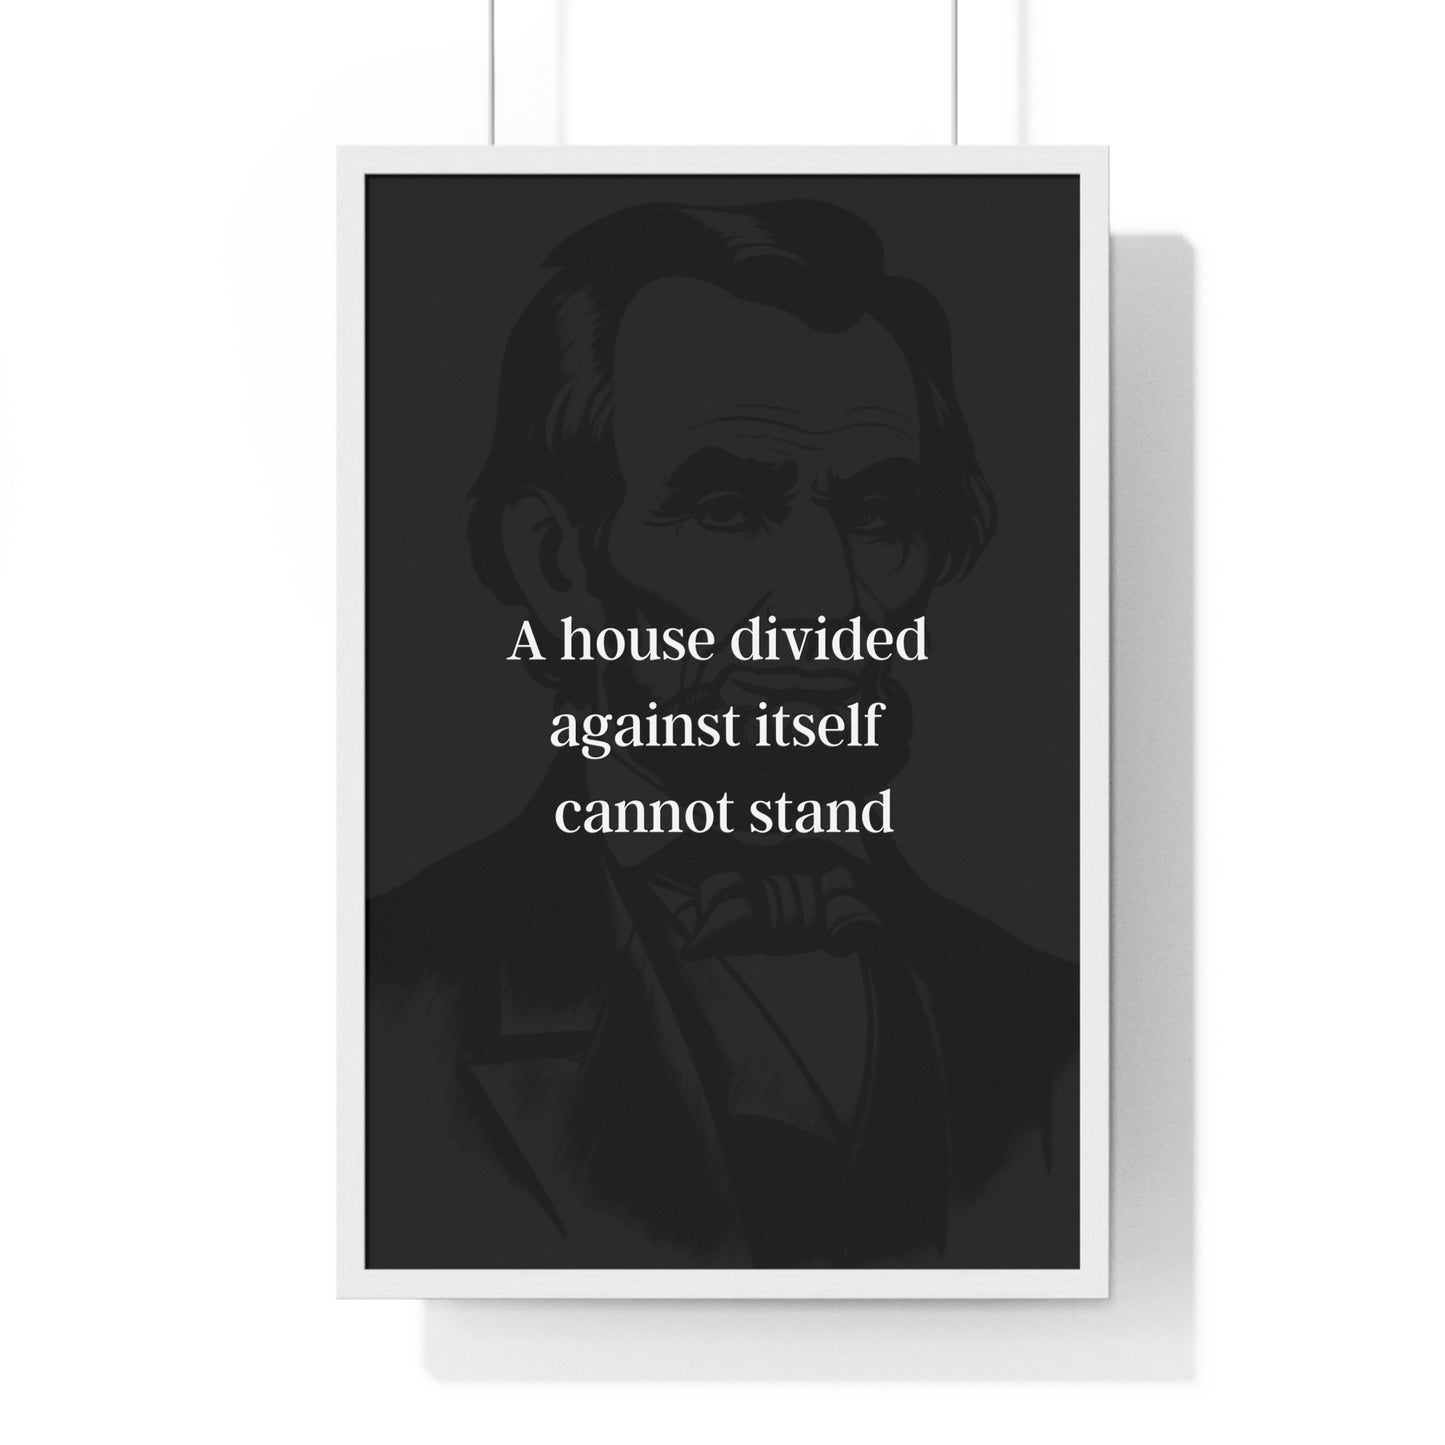 Abraham Lincoln Quote 6, Poster Art, Dark Print, 16th President of the United States, American Patriots, AI Art, Political Art, Poster Prints, Presidential Portraits, Presidential Quotes, Inspirational Quotes